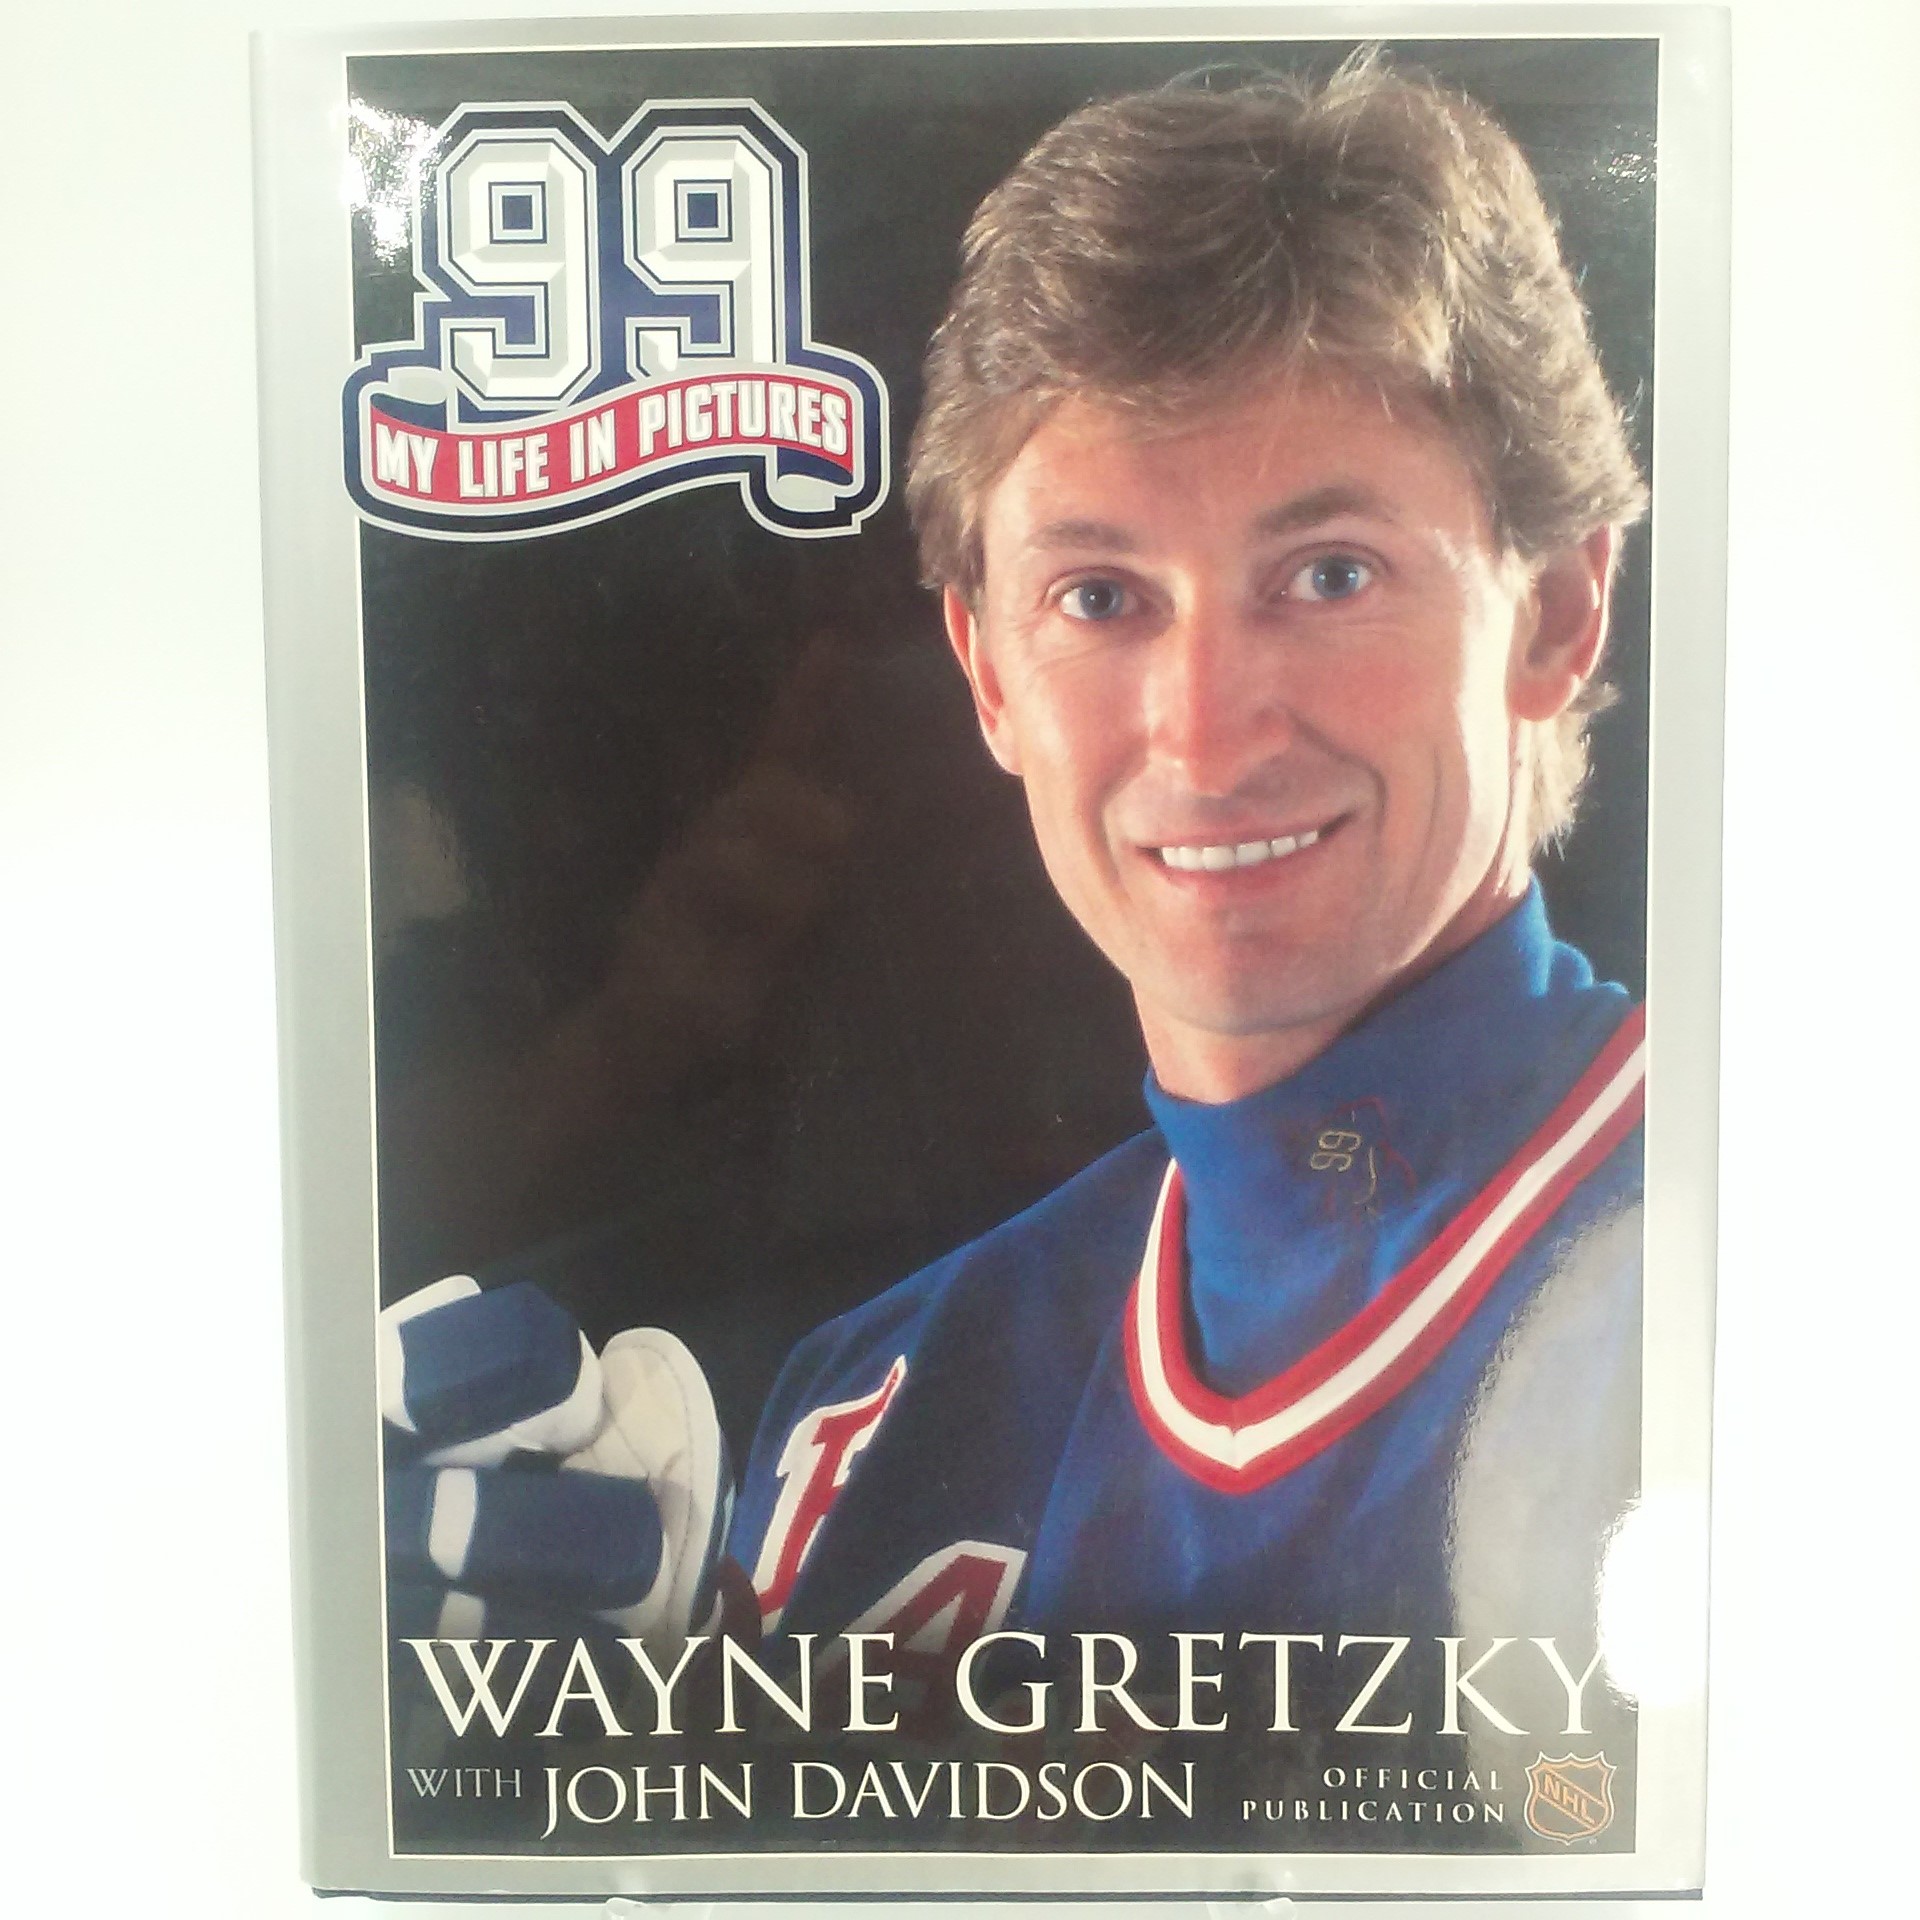 Book, 99 - Wayne Gretzky My Life in Pictures